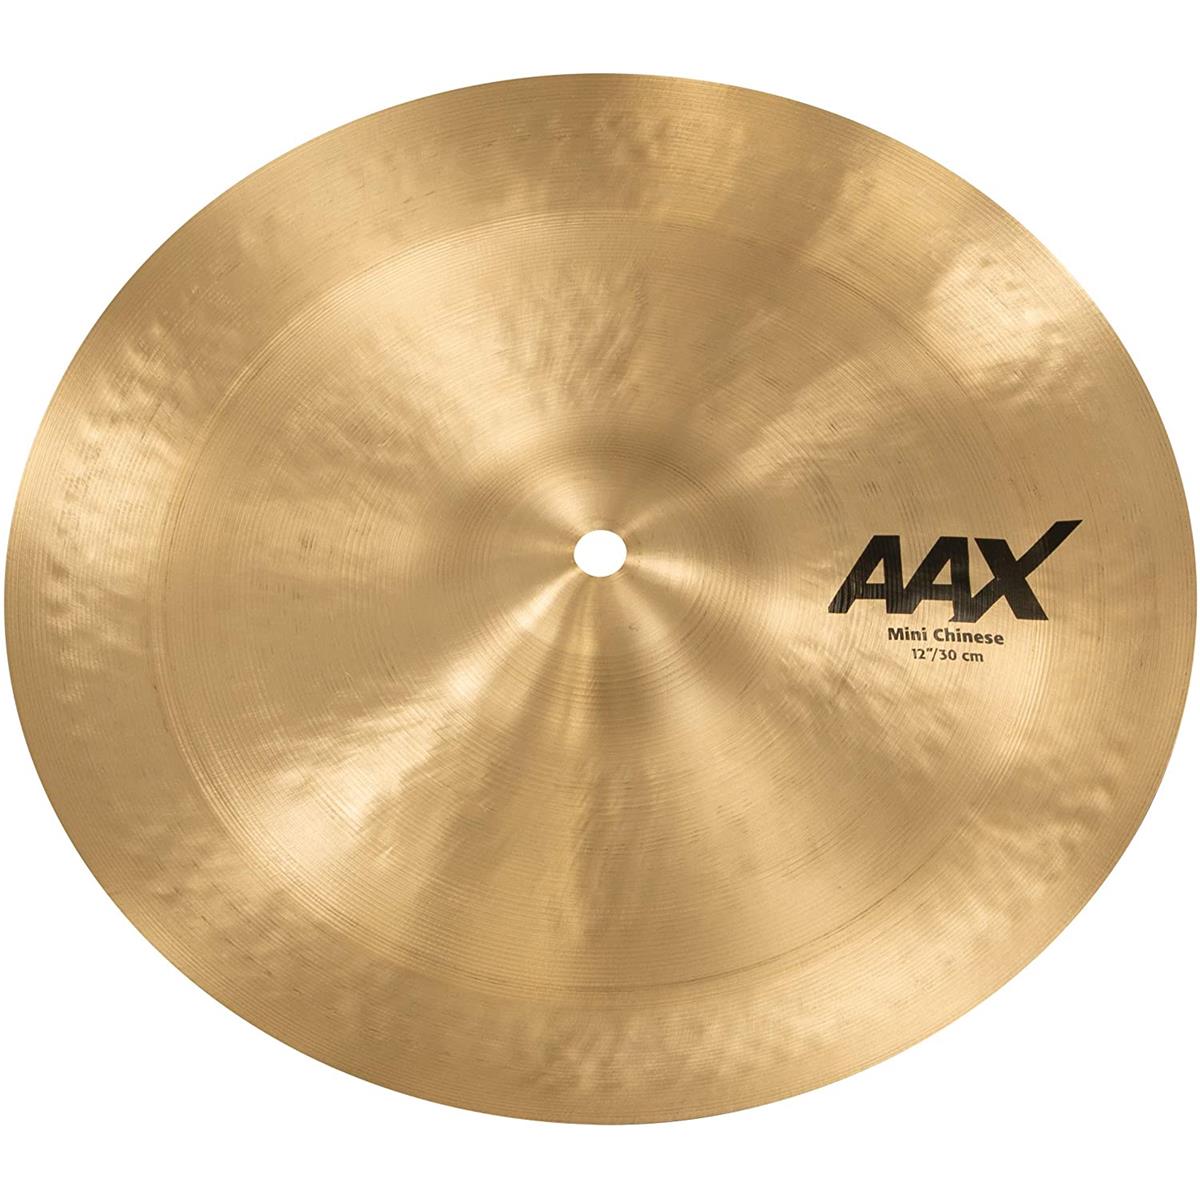 Sabian 12" AAX Mini Chinese Cymbal, Thin Aggressive accenting power in the form of cutting, raw attack and quick decay rate is what the SABIAN 12" AAX Mini Chinese is all about. The SABIAN AAX series delivers consistently bright, crisp, clear and cutting responses - AAX is the ultimate Modern Bright sound!